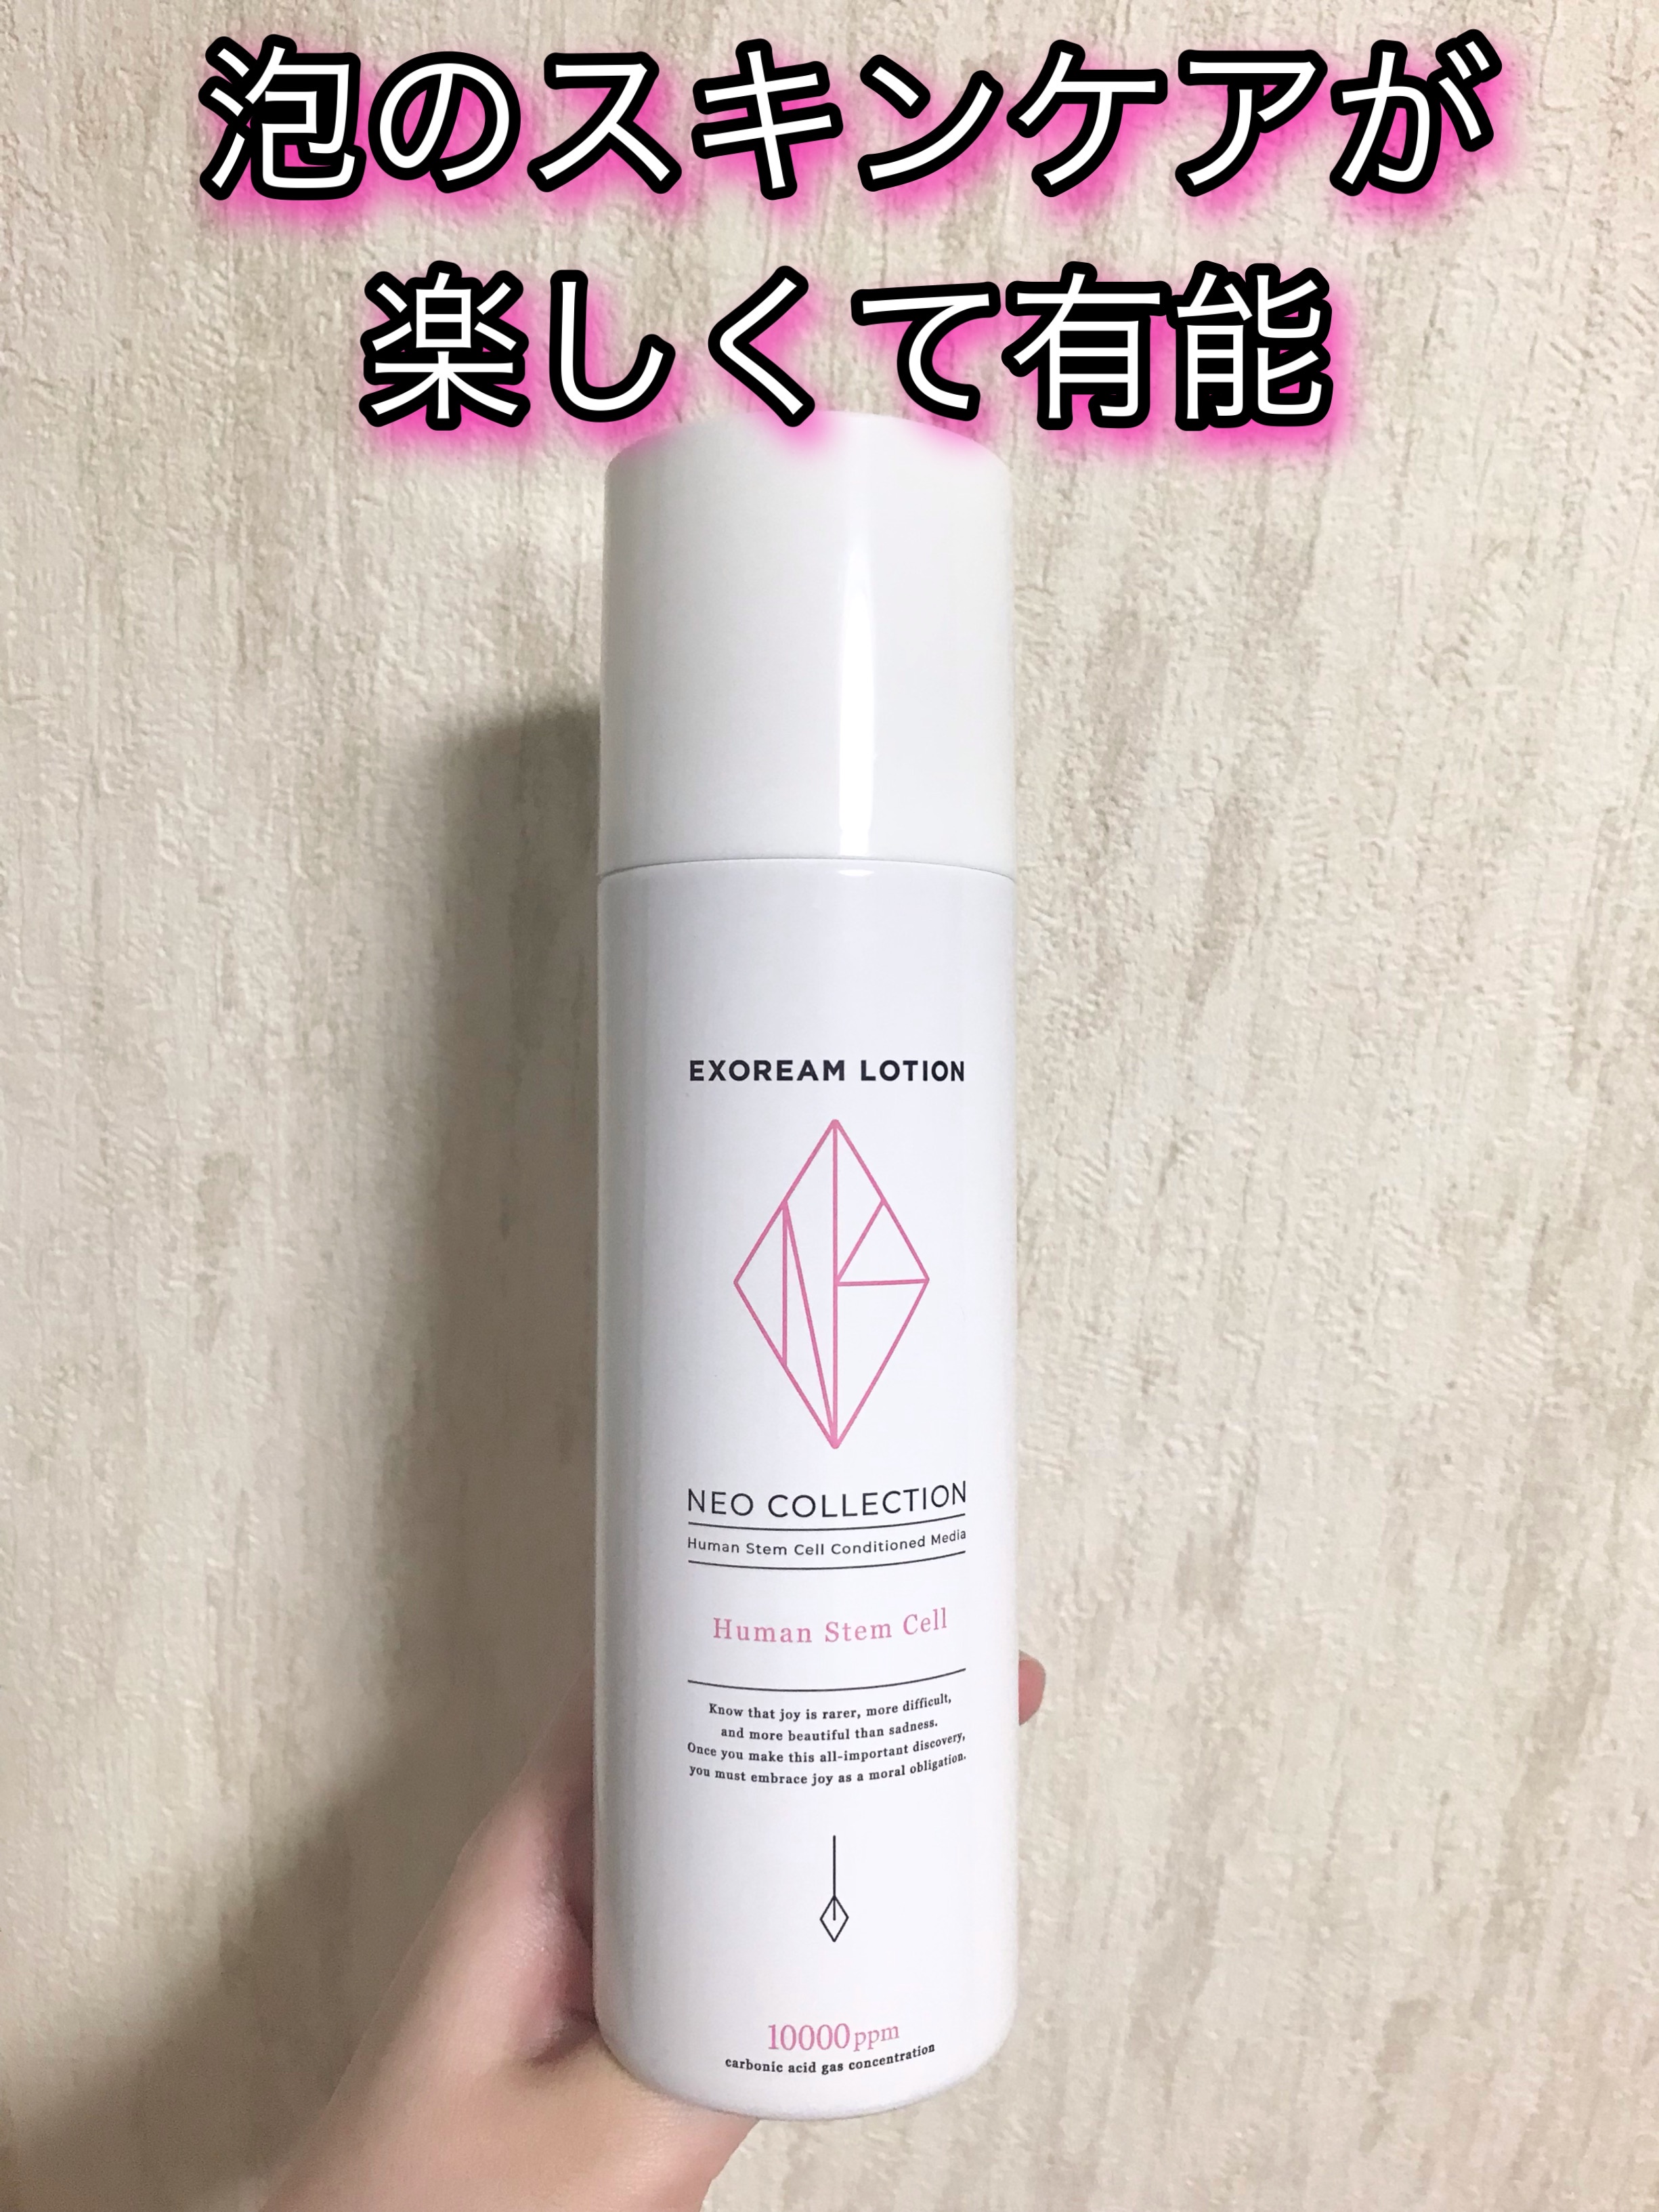 NEO COLLECTION / EXOREAM LOTIONの公式商品情報｜美容・化粧品情報は